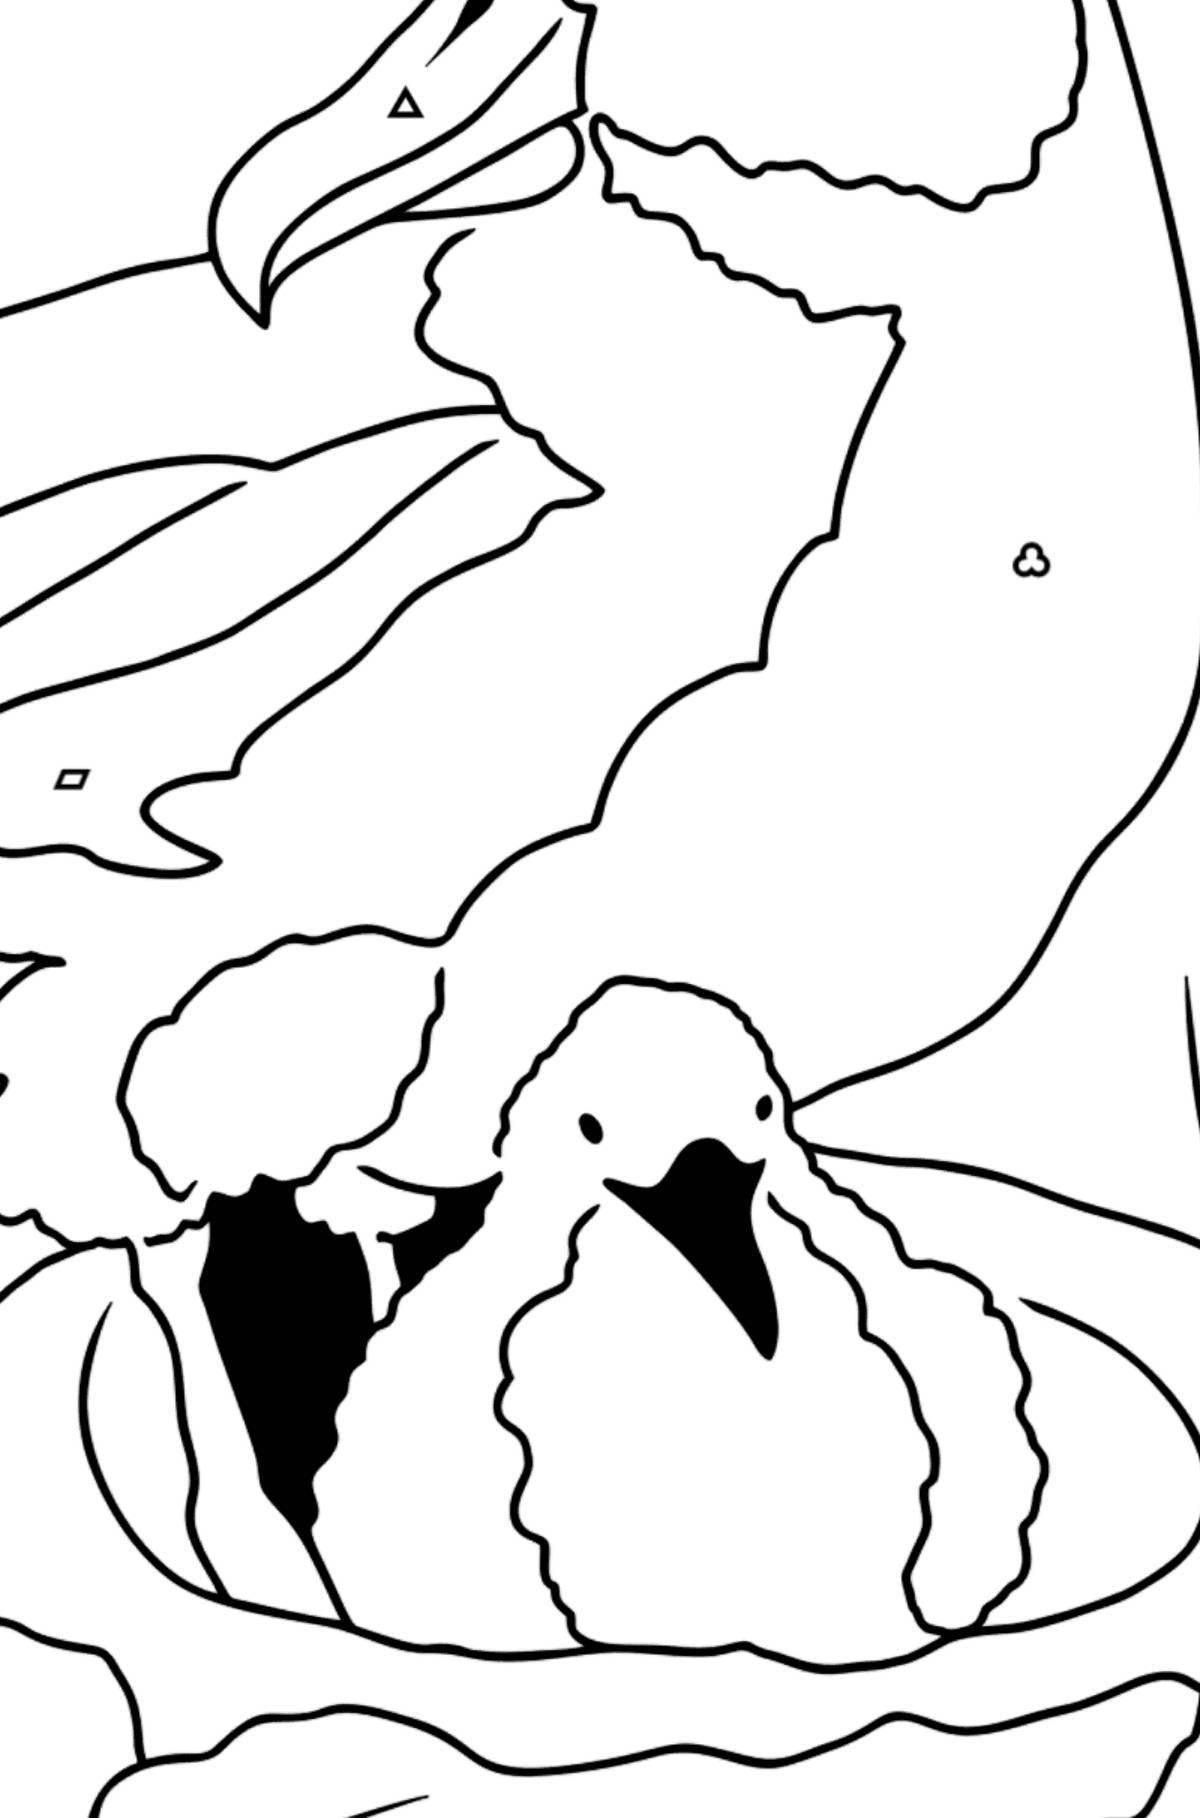 Coloring page dazzling albatross